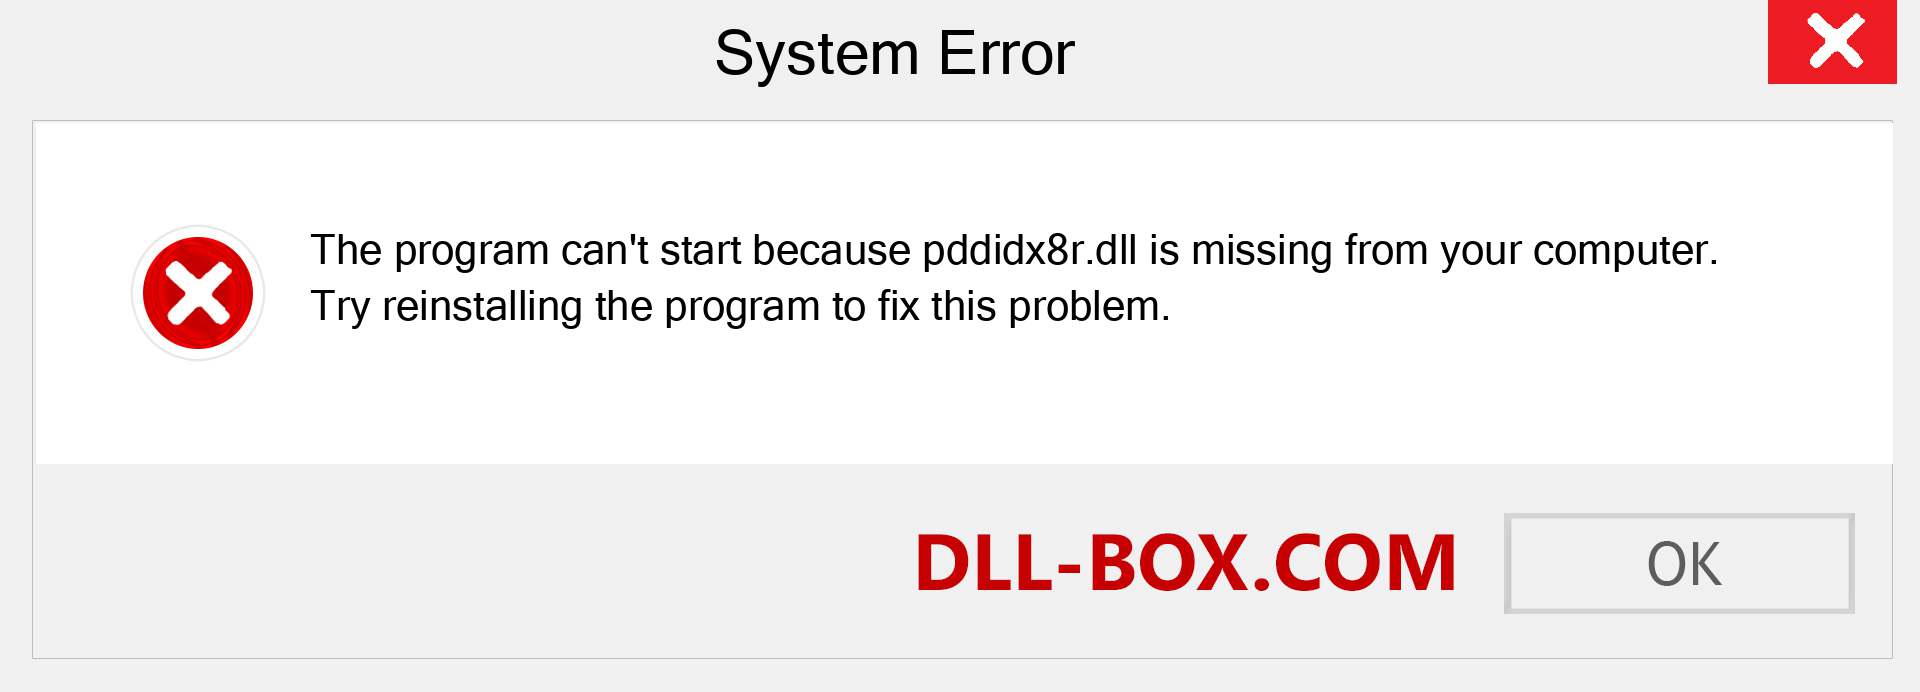  pddidx8r.dll file is missing?. Download for Windows 7, 8, 10 - Fix  pddidx8r dll Missing Error on Windows, photos, images